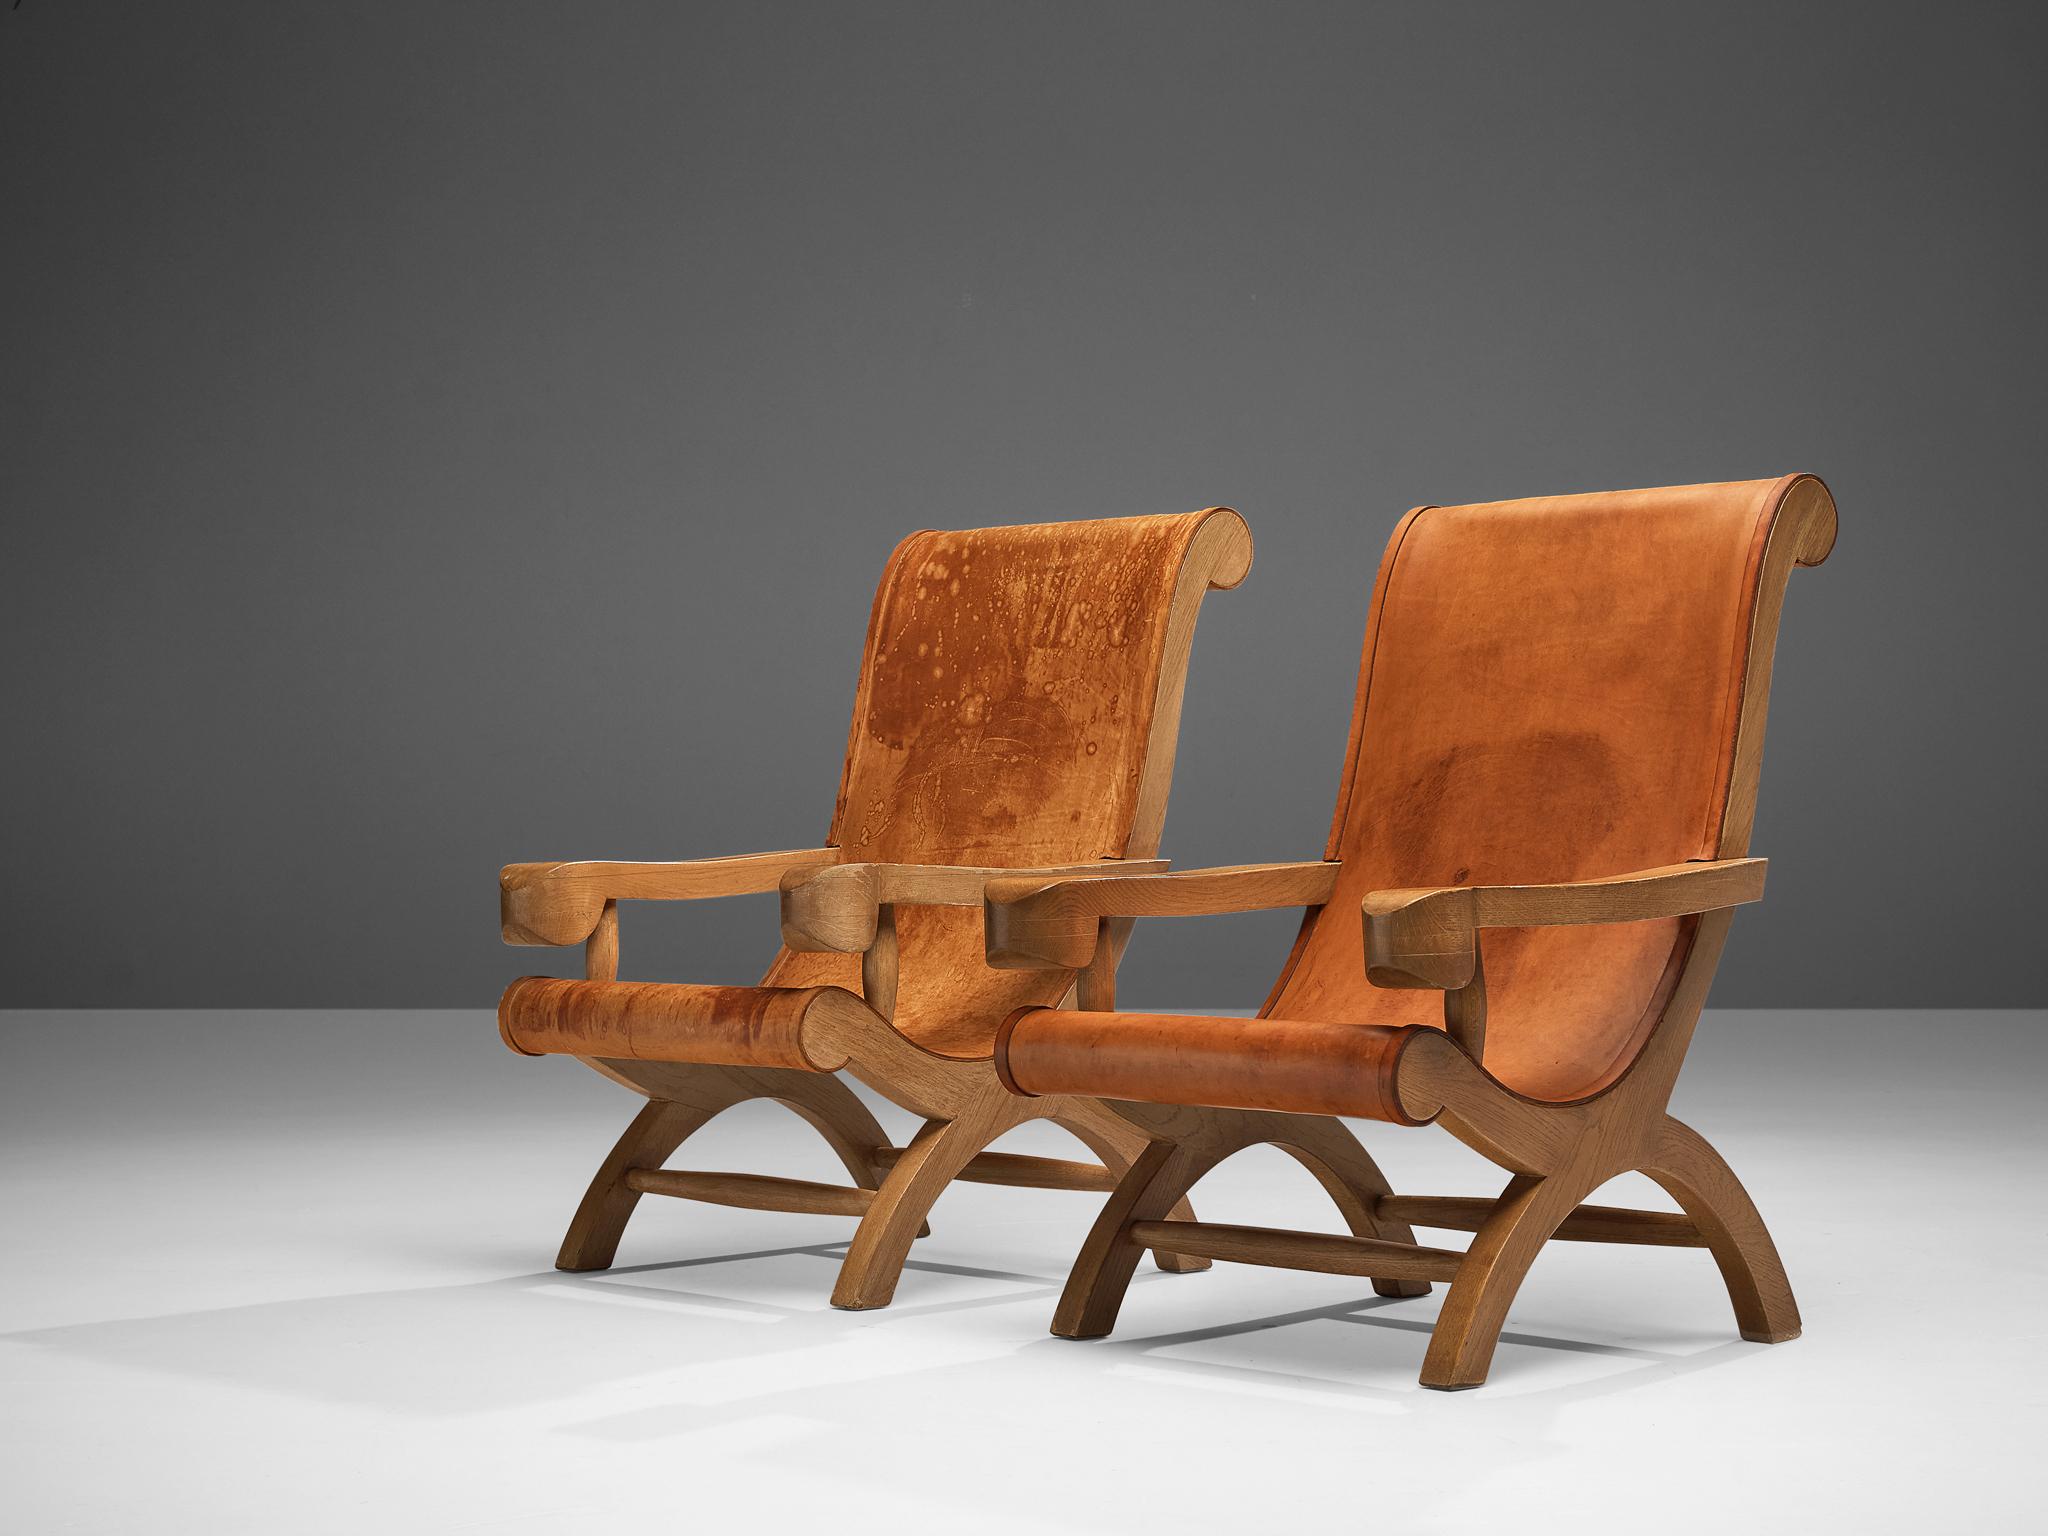 Clara Porset Lounge Chairs 'Butaque' in Original Patinated Leather 1